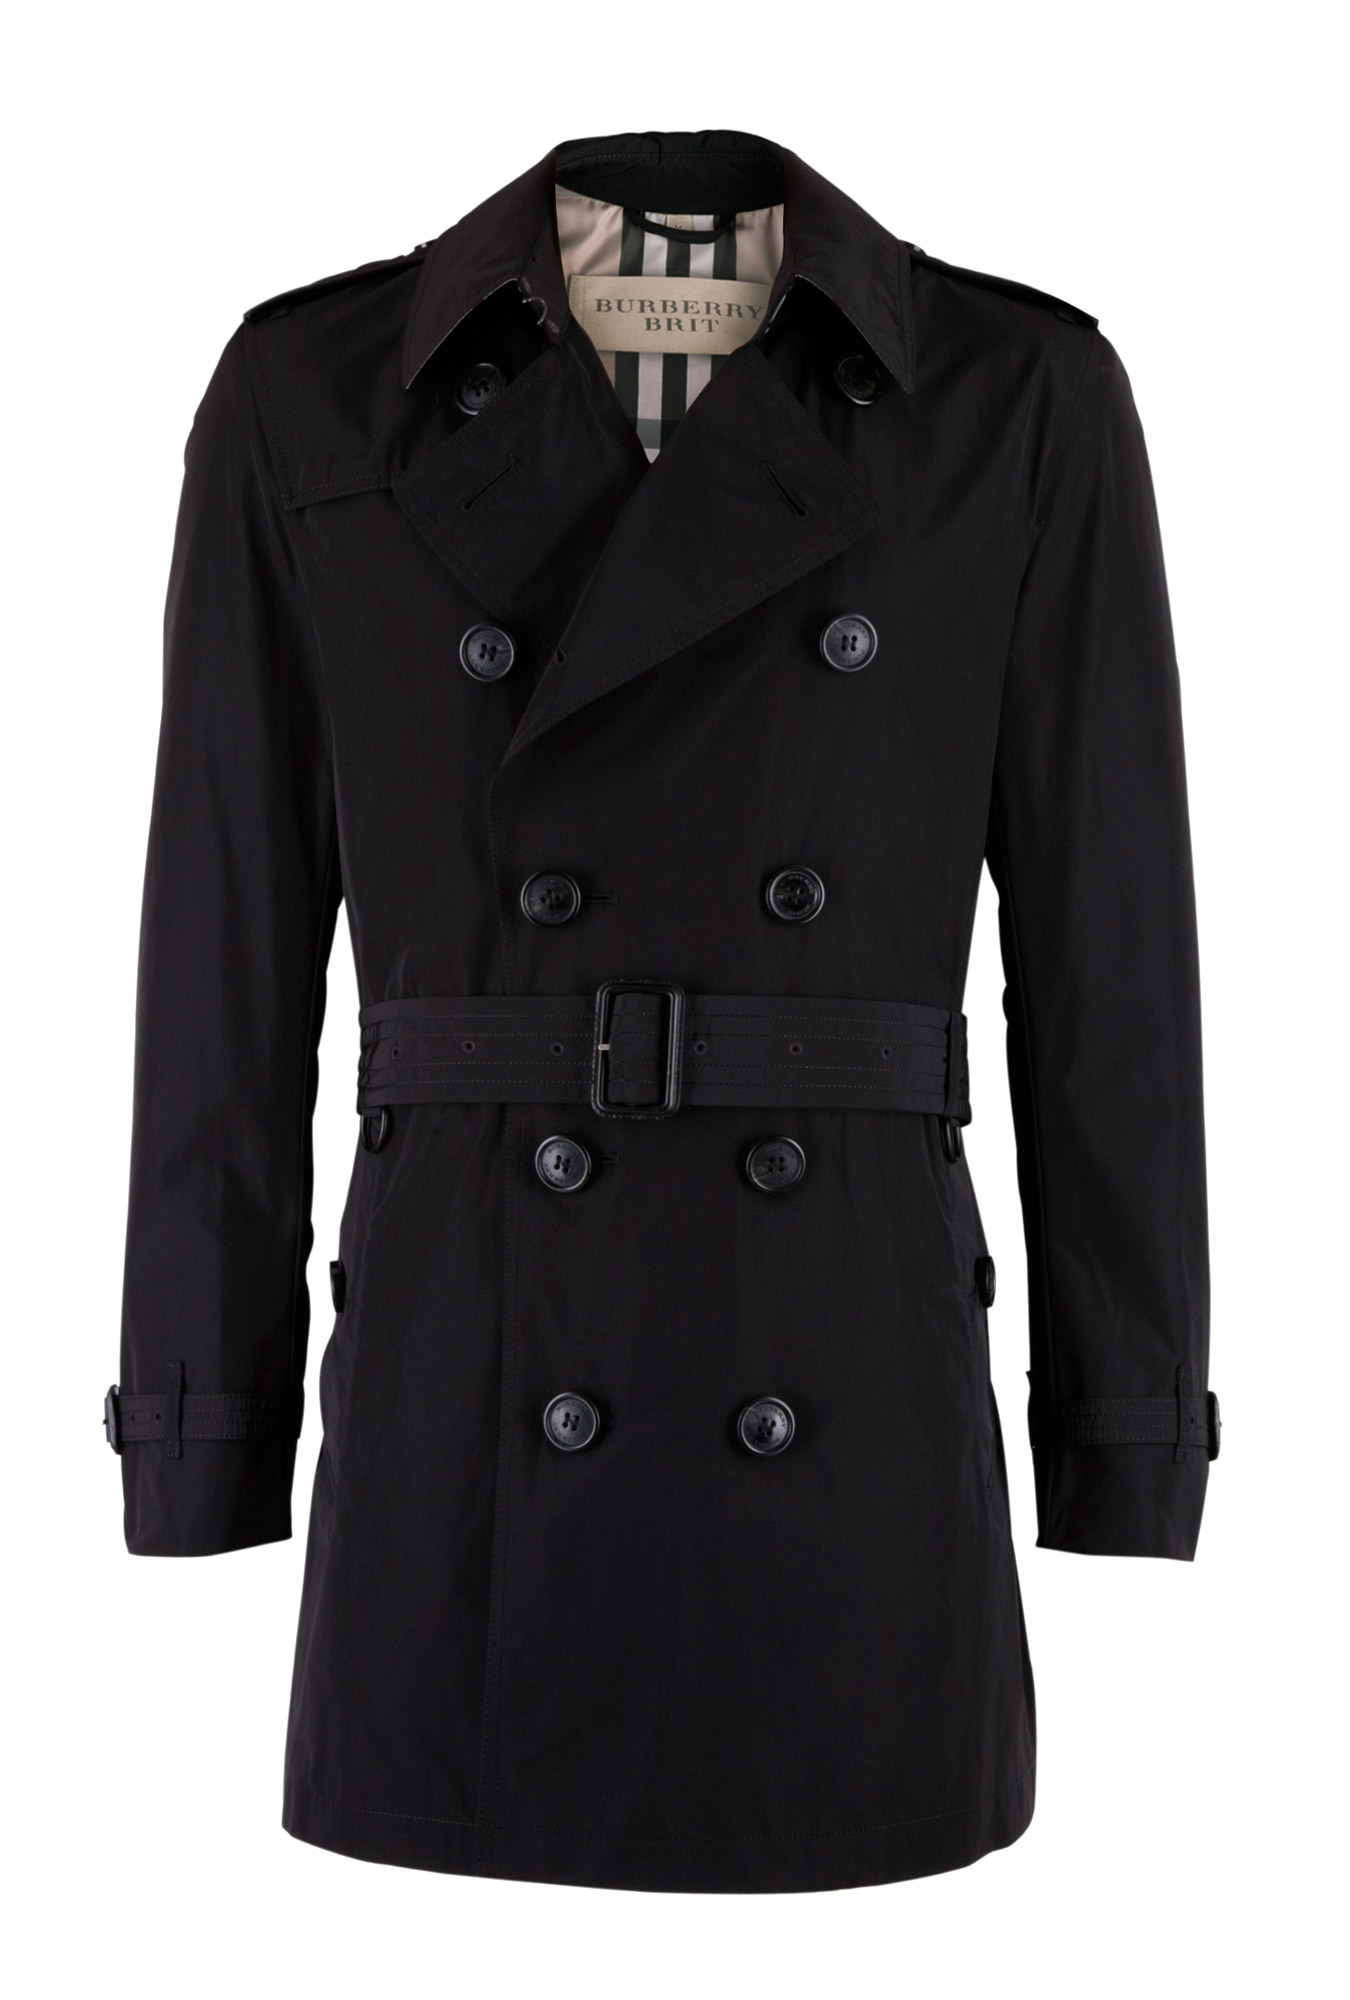 Burberry Black Packable Trench Coat in Black for Men | Lyst